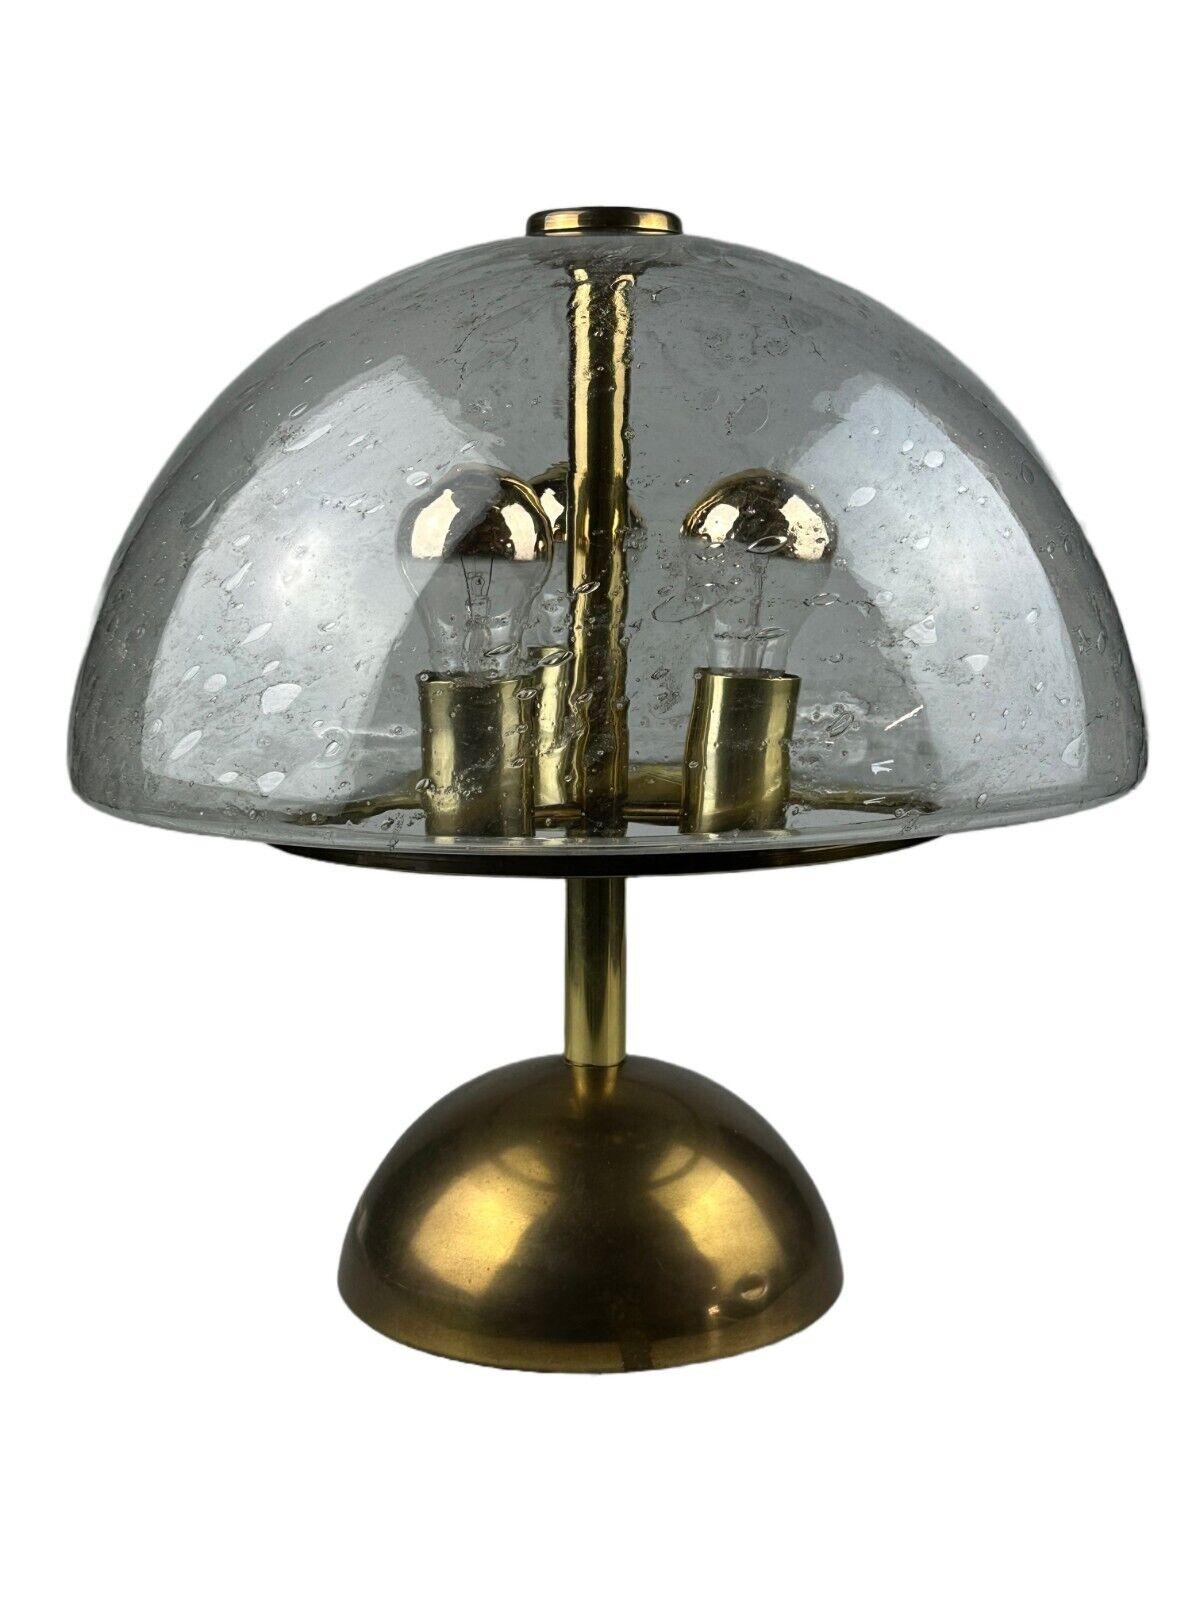 60s 70s table lamp by Doria Leuchten Germany glass brass Space Age

Object: table lamp

Manufacturer: Doria

Condition: good

Age: around 1960-1970

Dimensions:

Diameter = 41.5cm
Height = 42cm

Other notes:

3x E27 socket

The pictures serve as